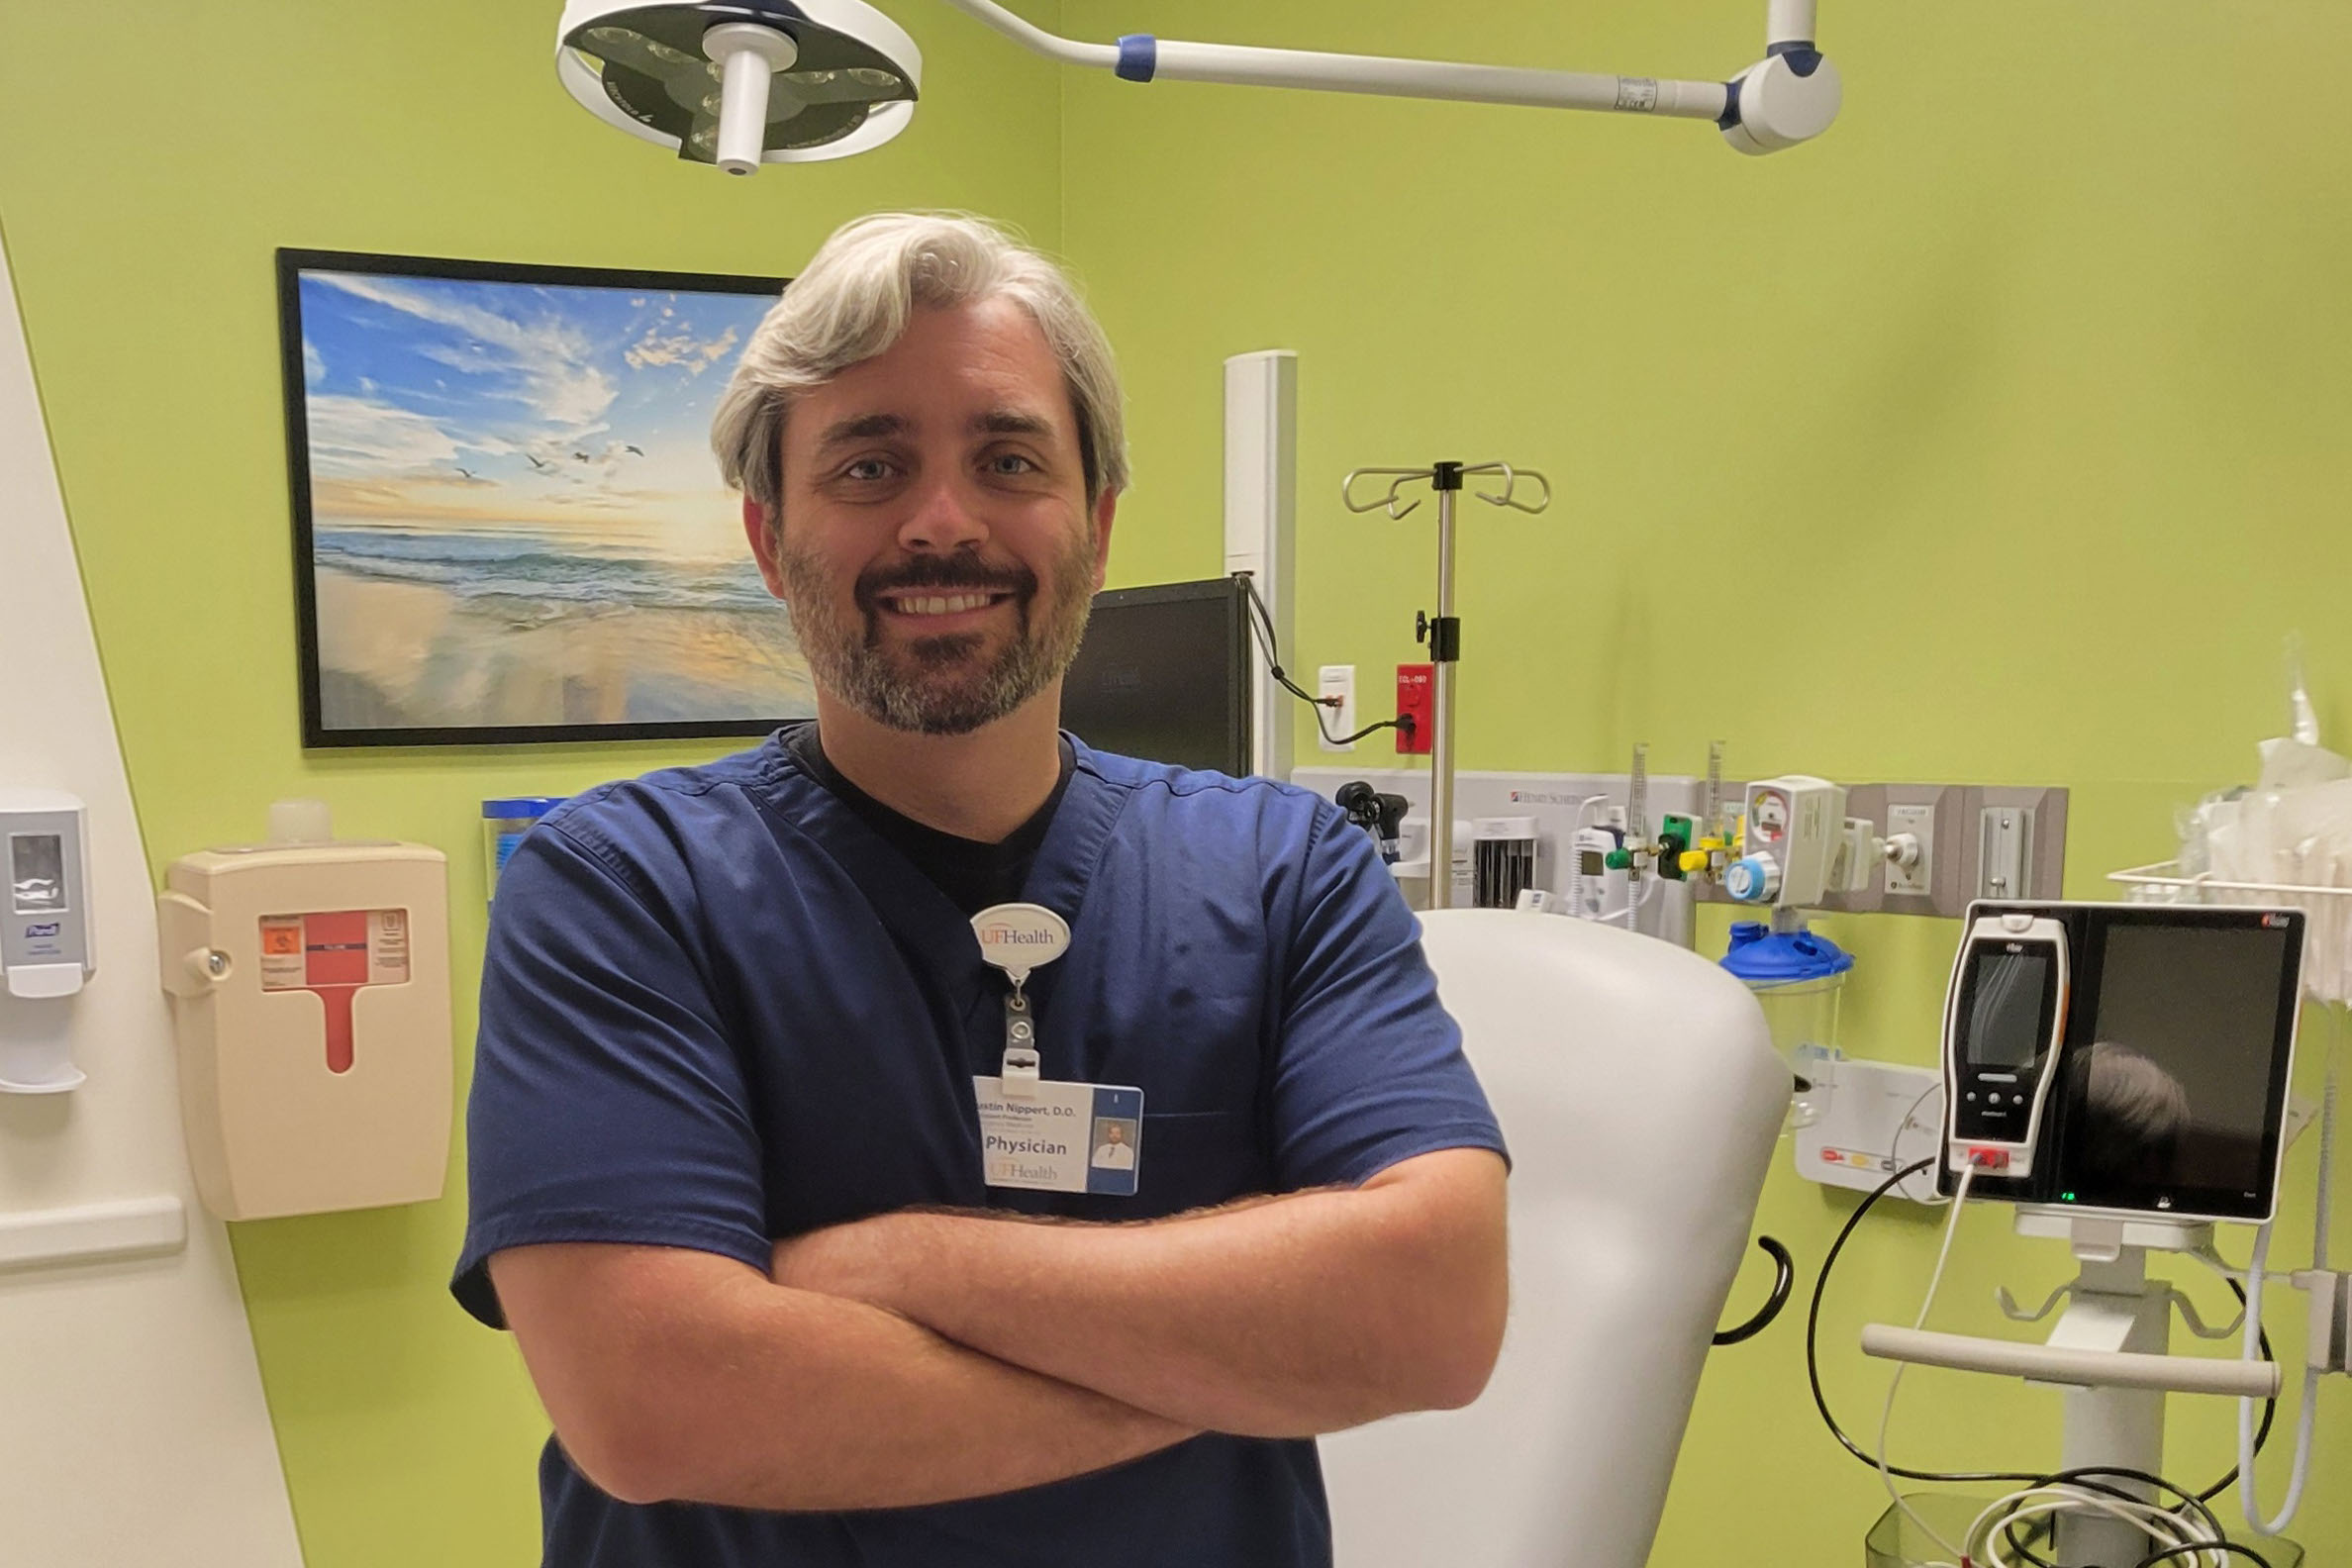 Justin Nippert, an emergency physician, is standing in a medical room. He has his arms crossed and smiles broadly, facing the camera.